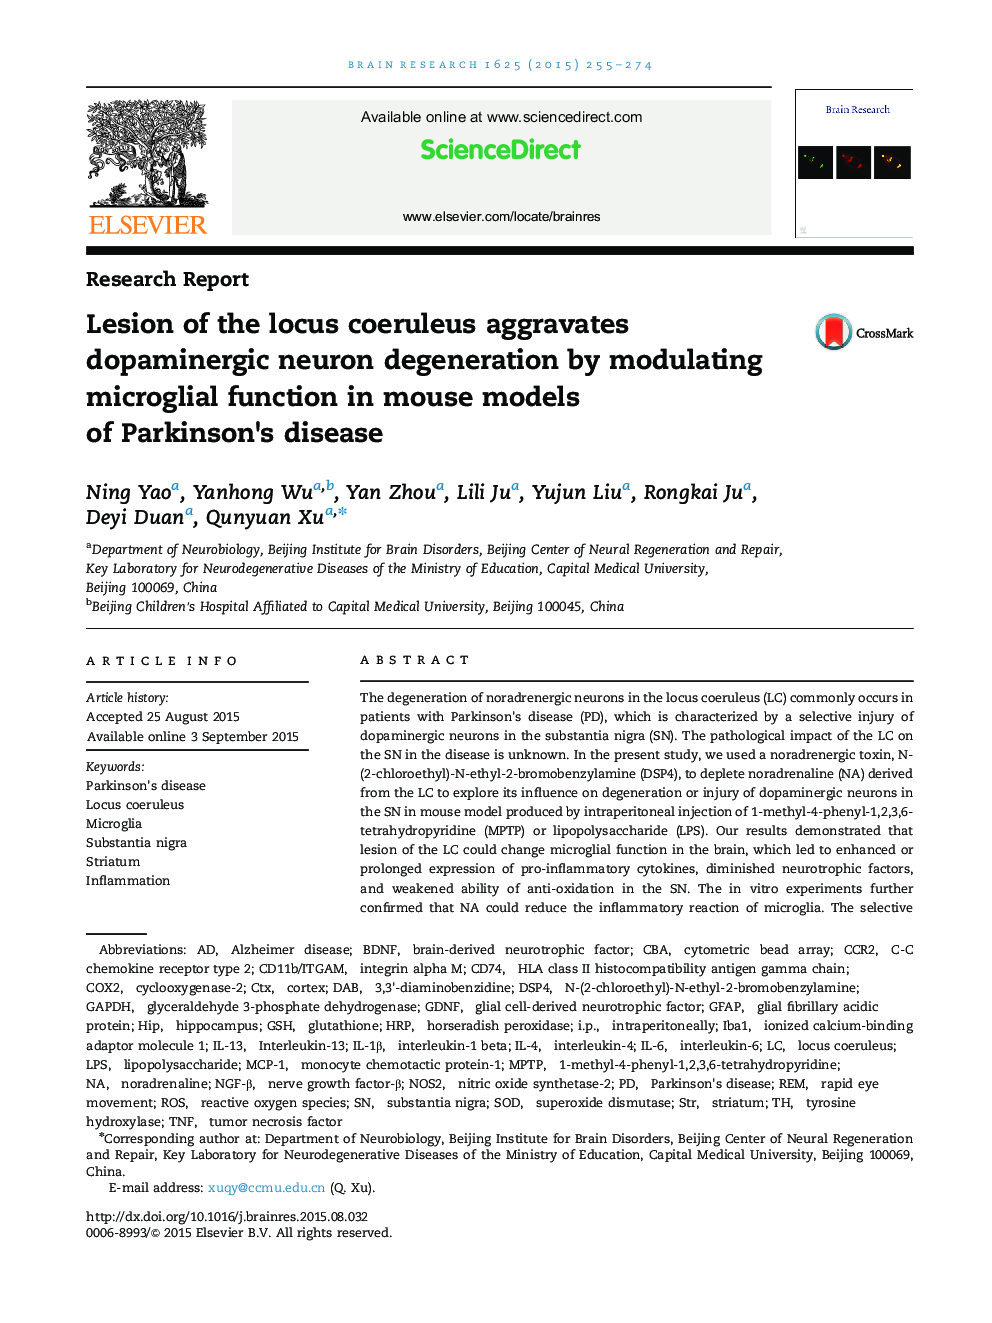 Research ReportLesion of the locus coeruleus aggravates dopaminergic neuron degeneration by modulating microglial function in mouse models of Parkinson×³s disease